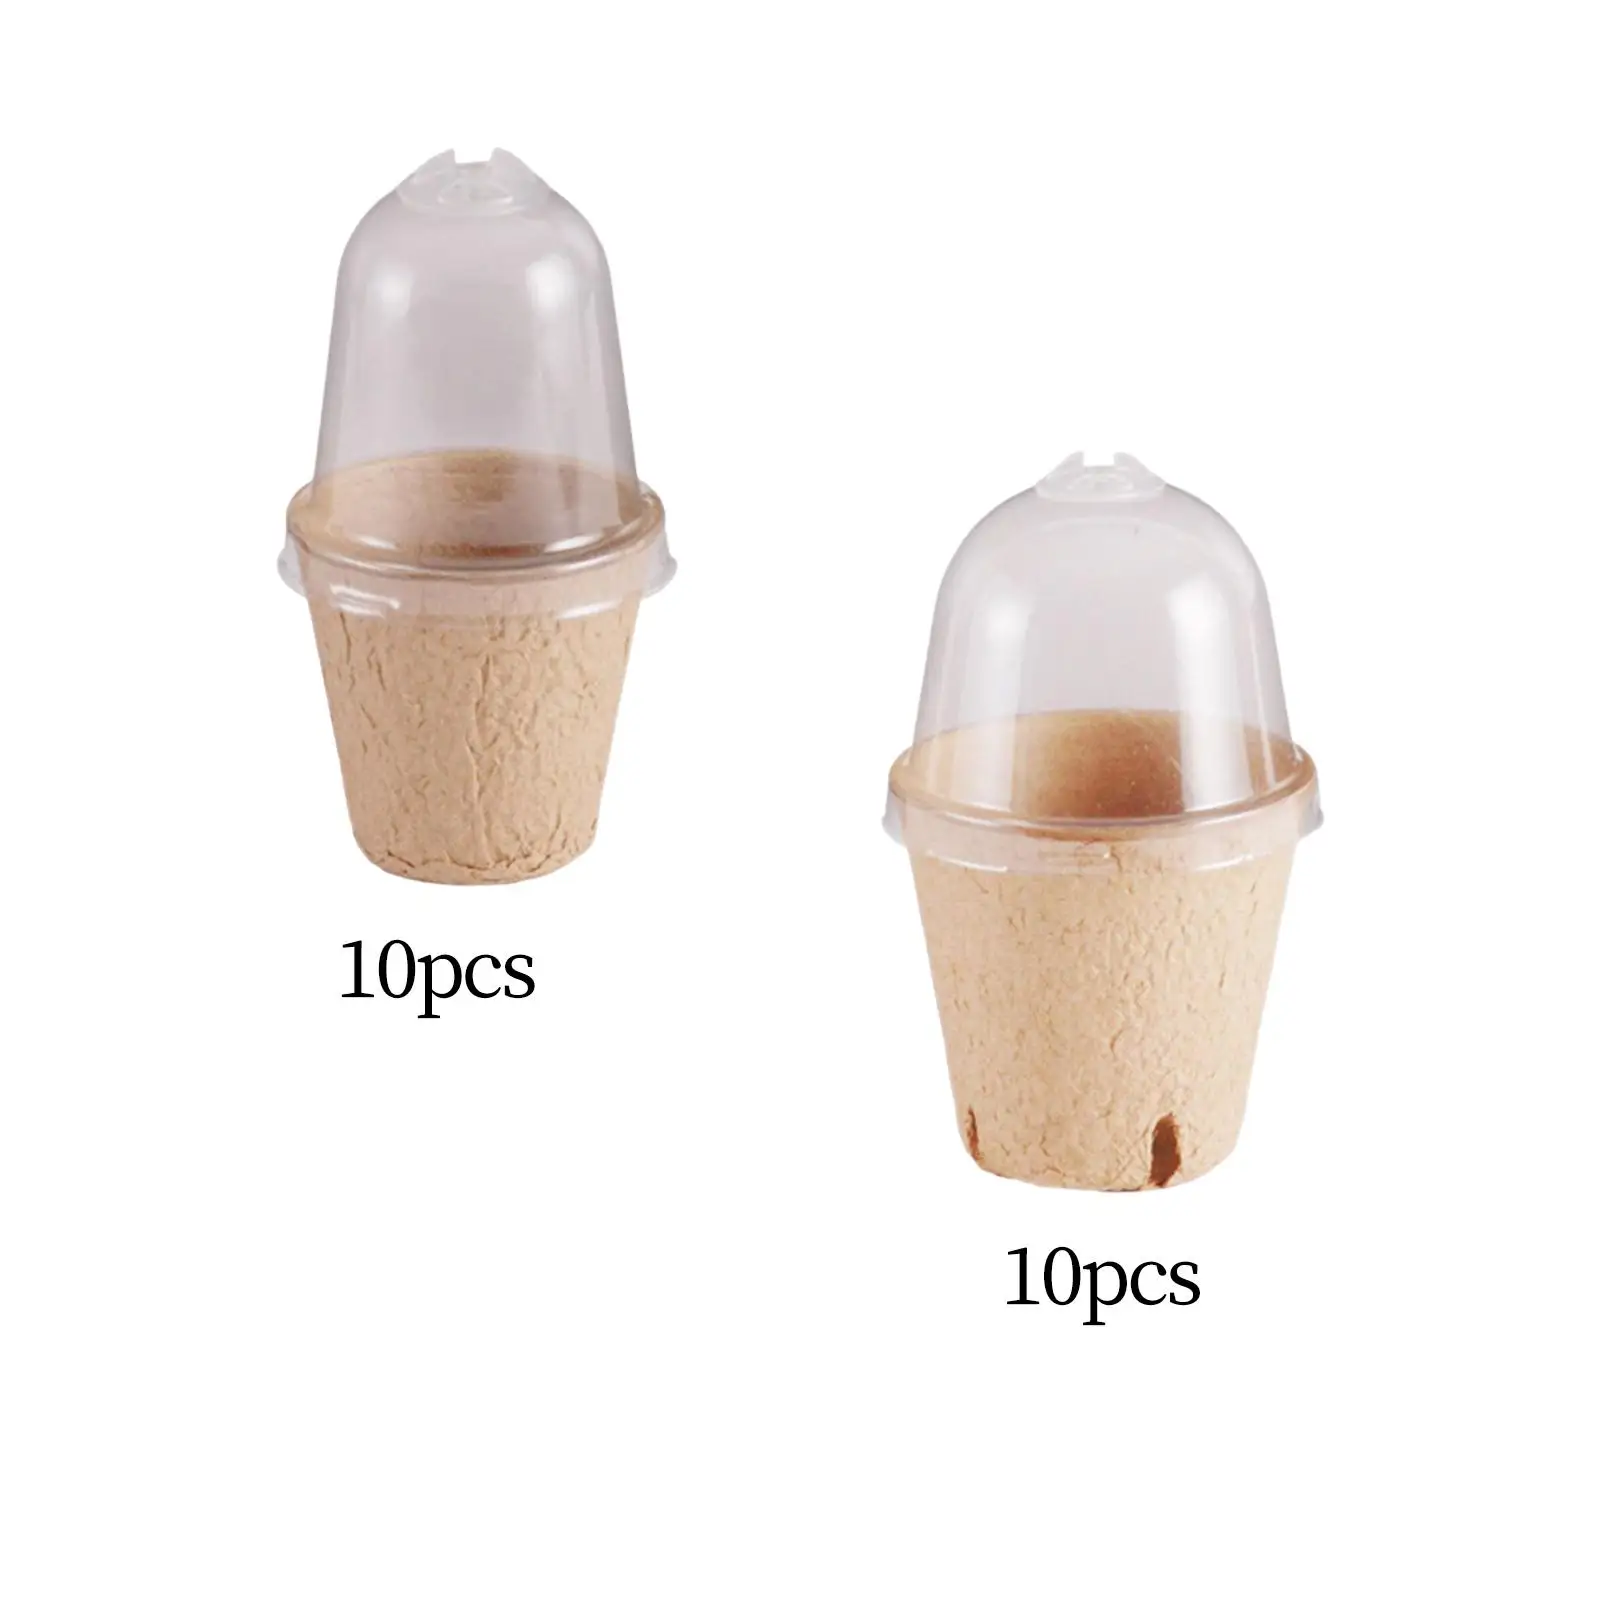 10 Pieces Planter Growing Pot Planting Containers Cups Gardening Pot for Home